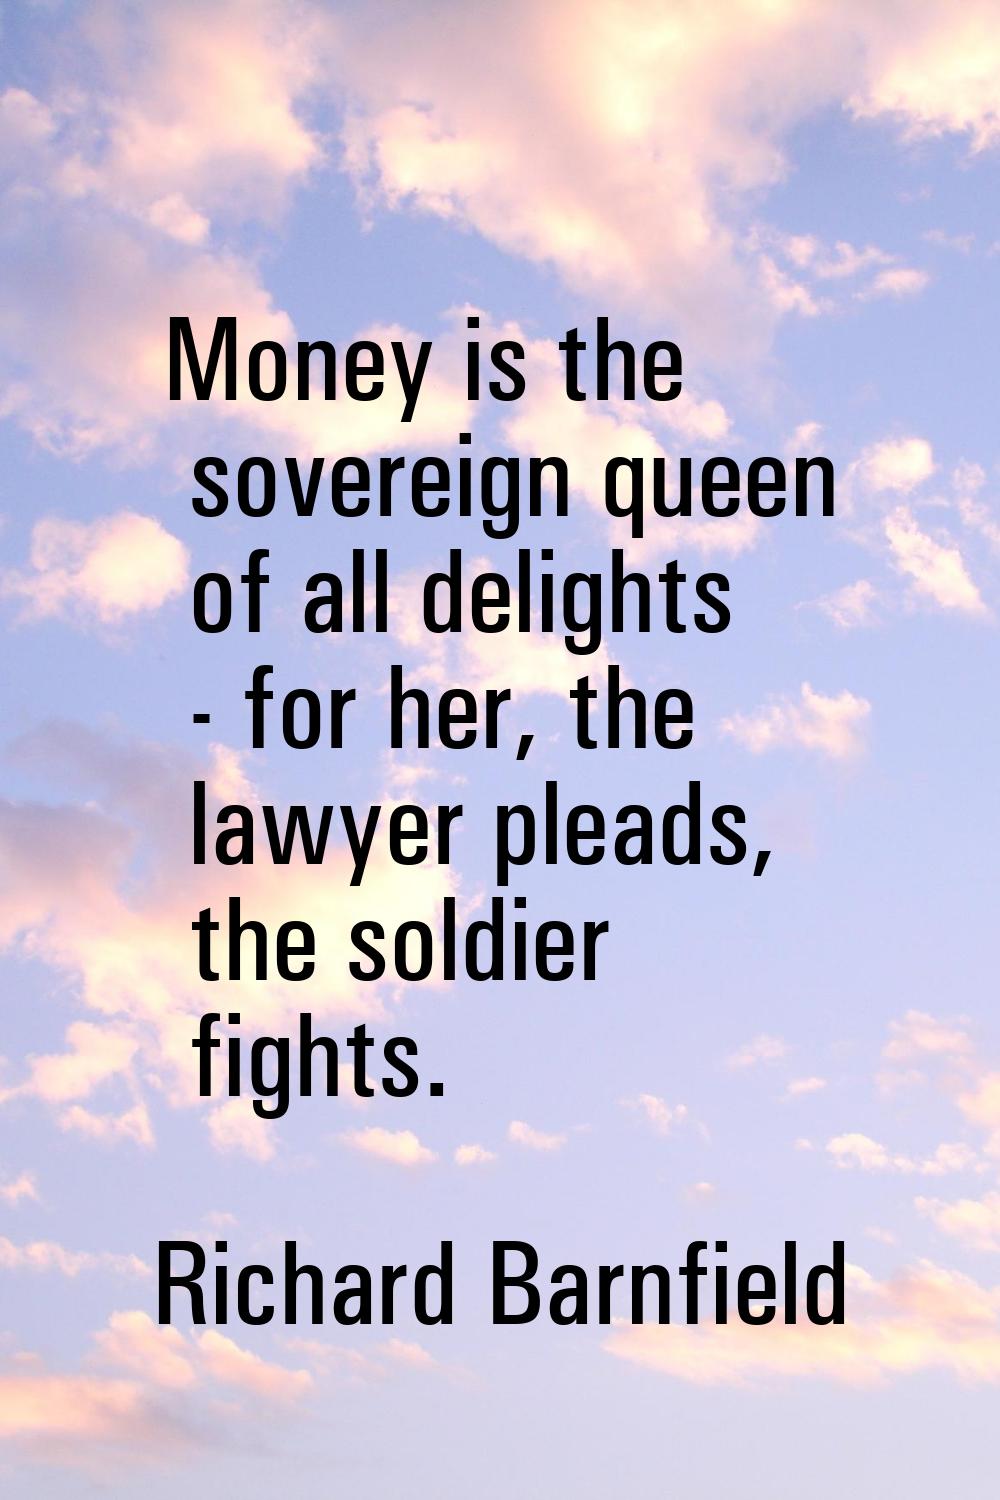 Money is the sovereign queen of all delights - for her, the lawyer pleads, the soldier fights.